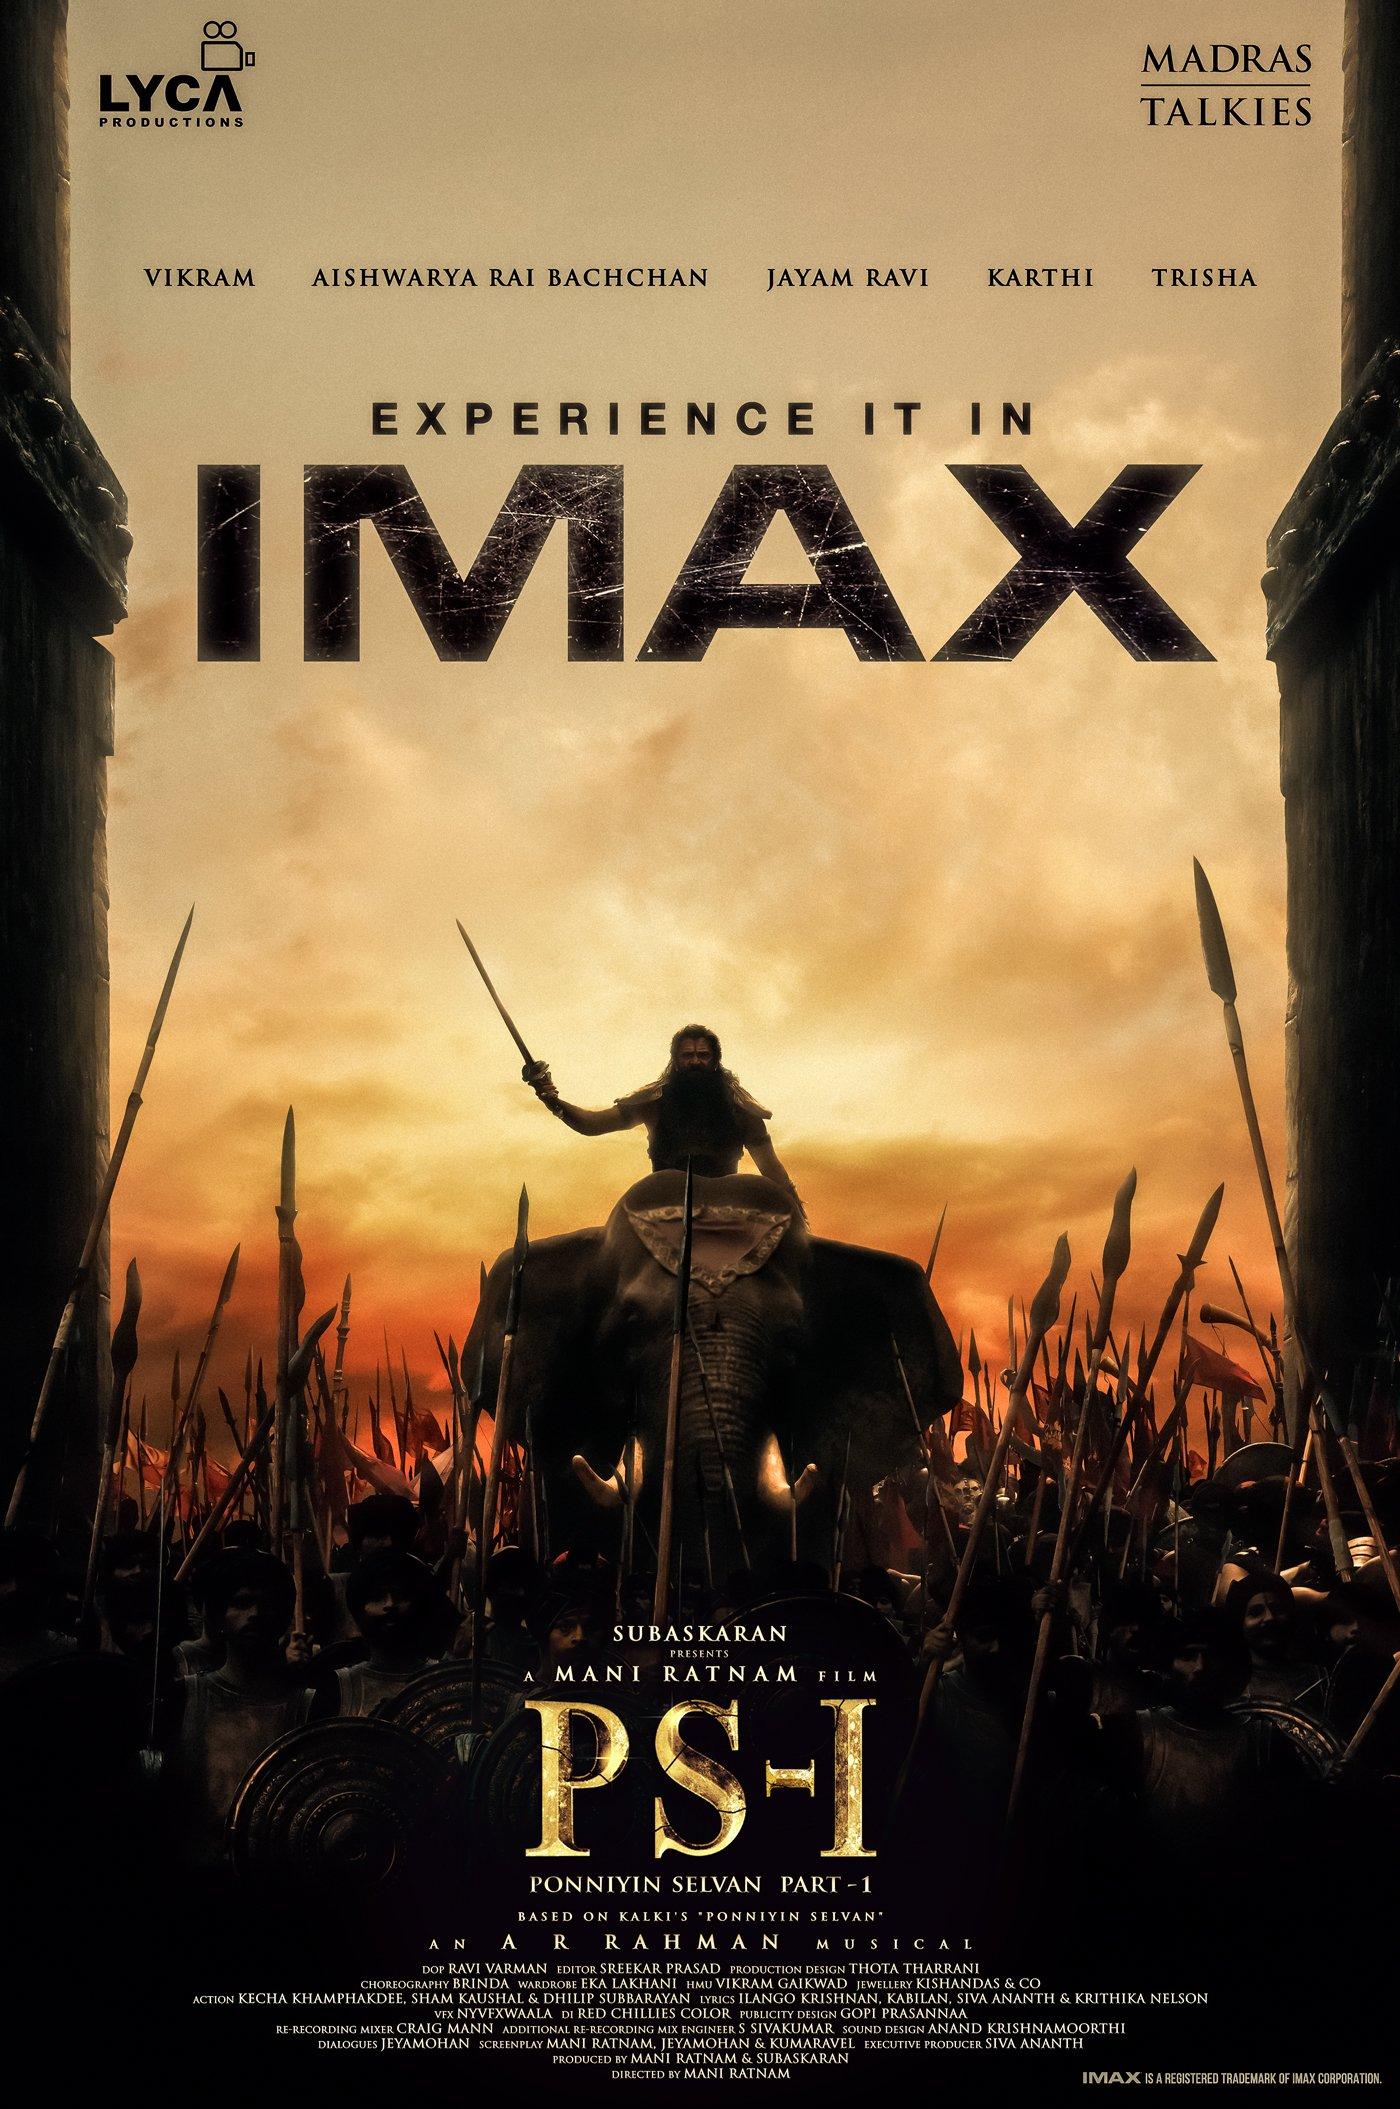 Ponniyin Selvan joins the list of Imax firsts in India Tamil Movie